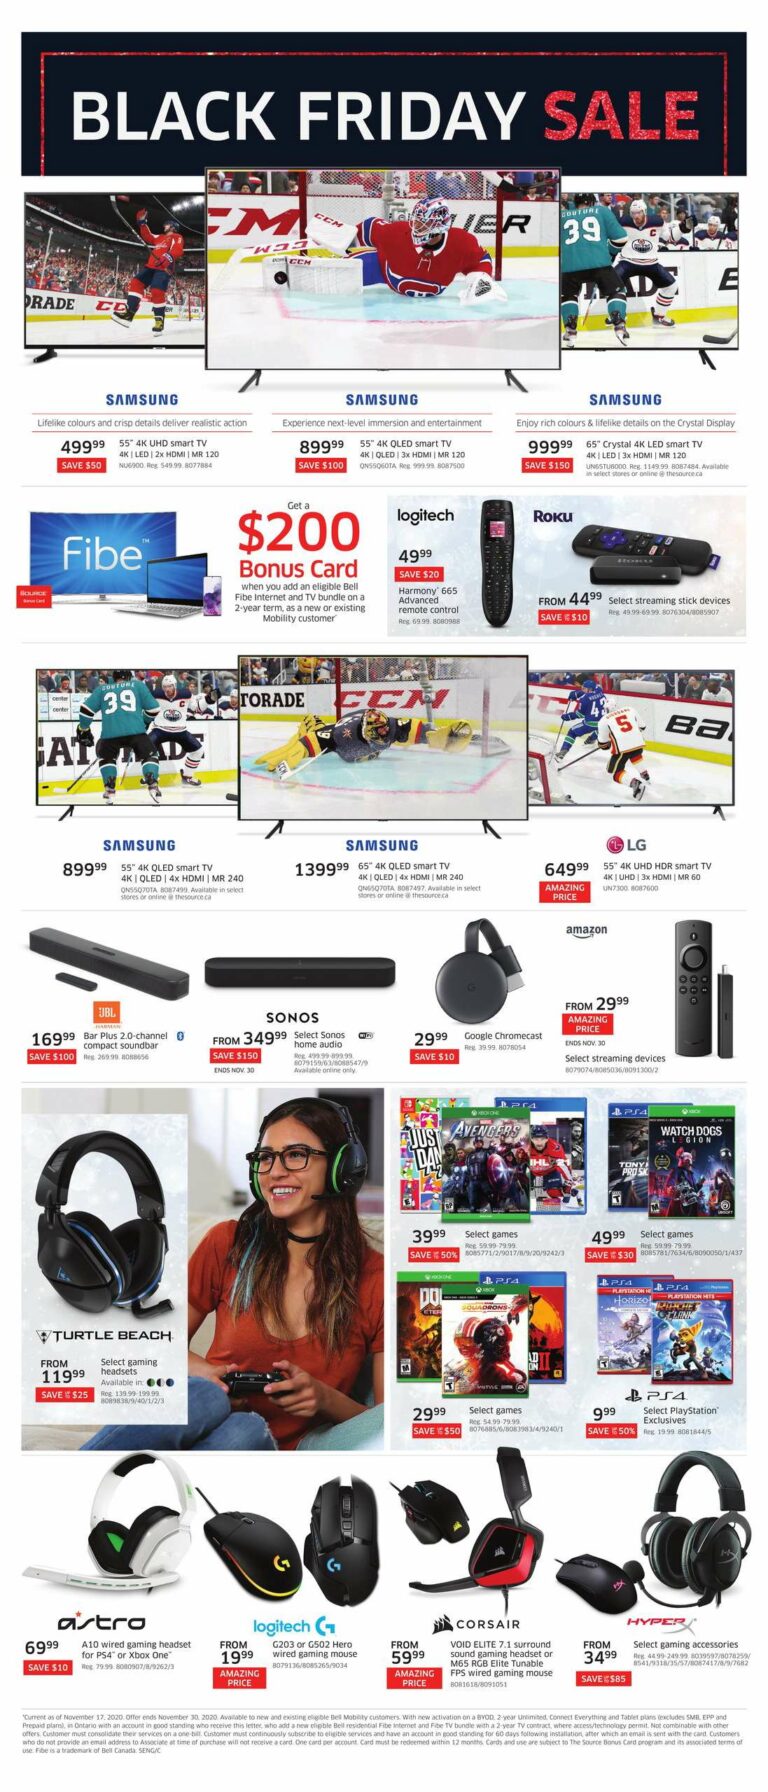 The Source Black Friday 2021 Sale Flyer - When To Black Friday 2021 Deals Start